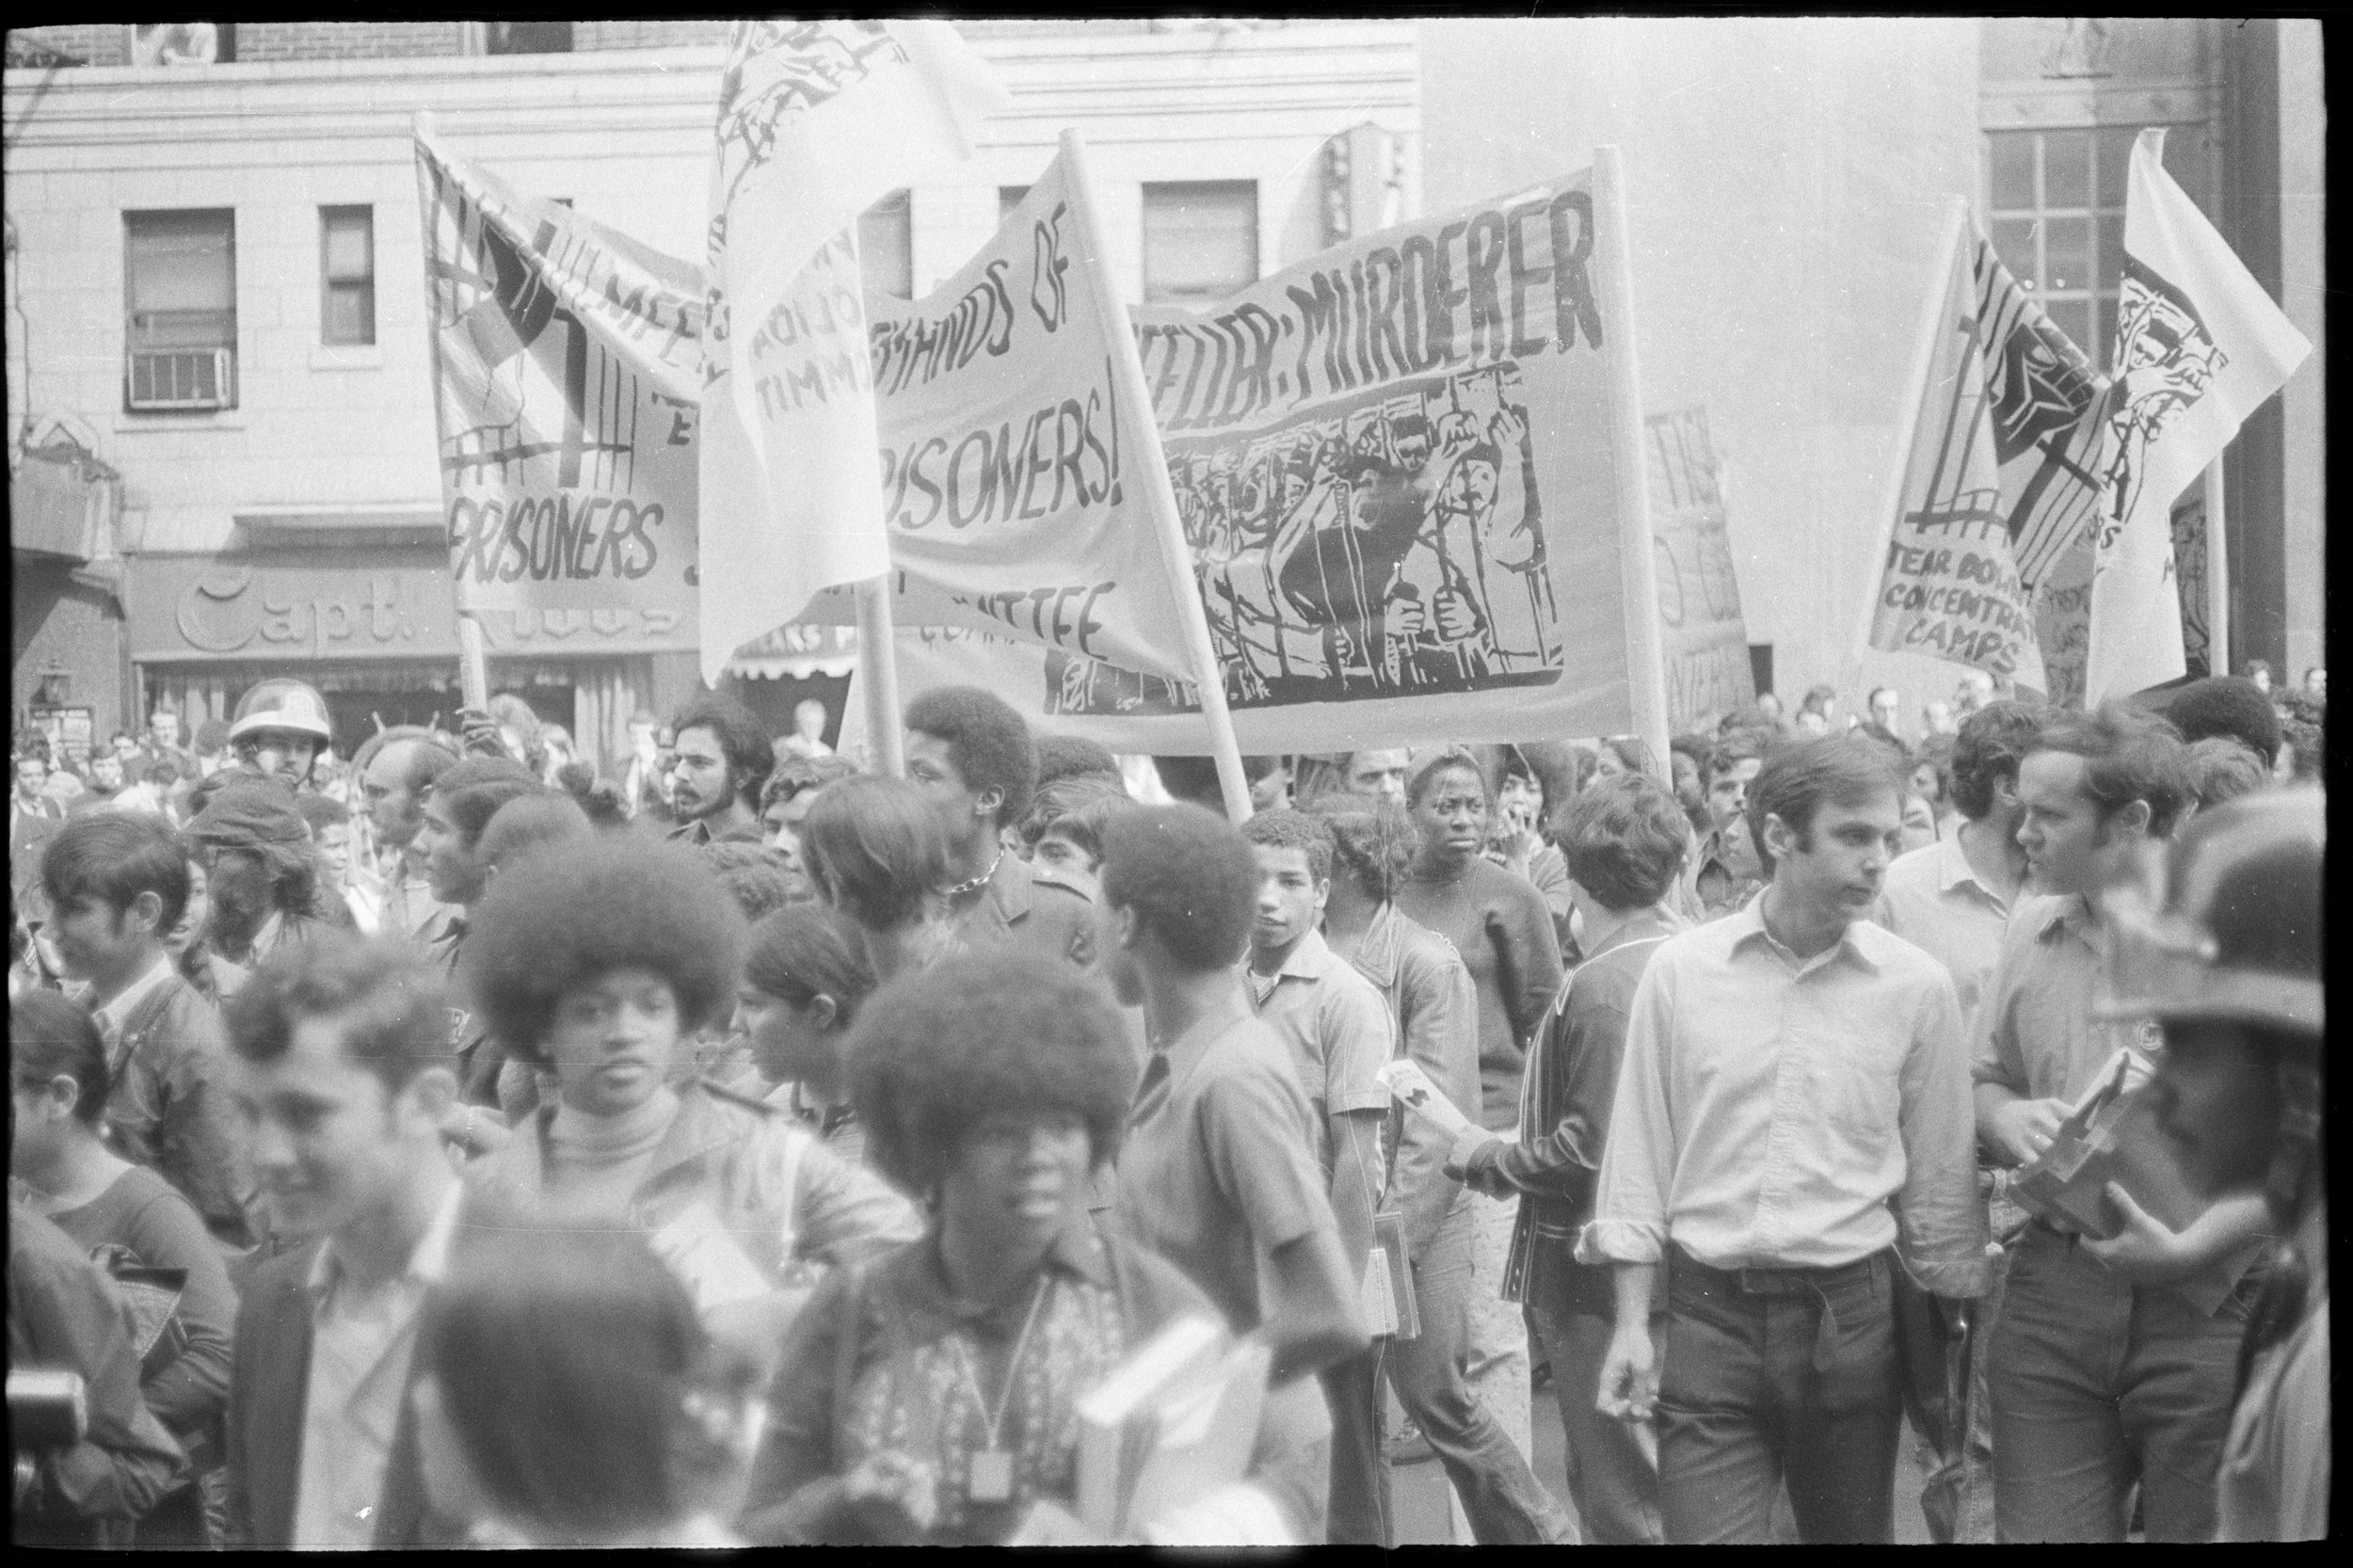 Demonstration at Lexington Avenue and 23rd Street, support for Attica, October 6, 1971